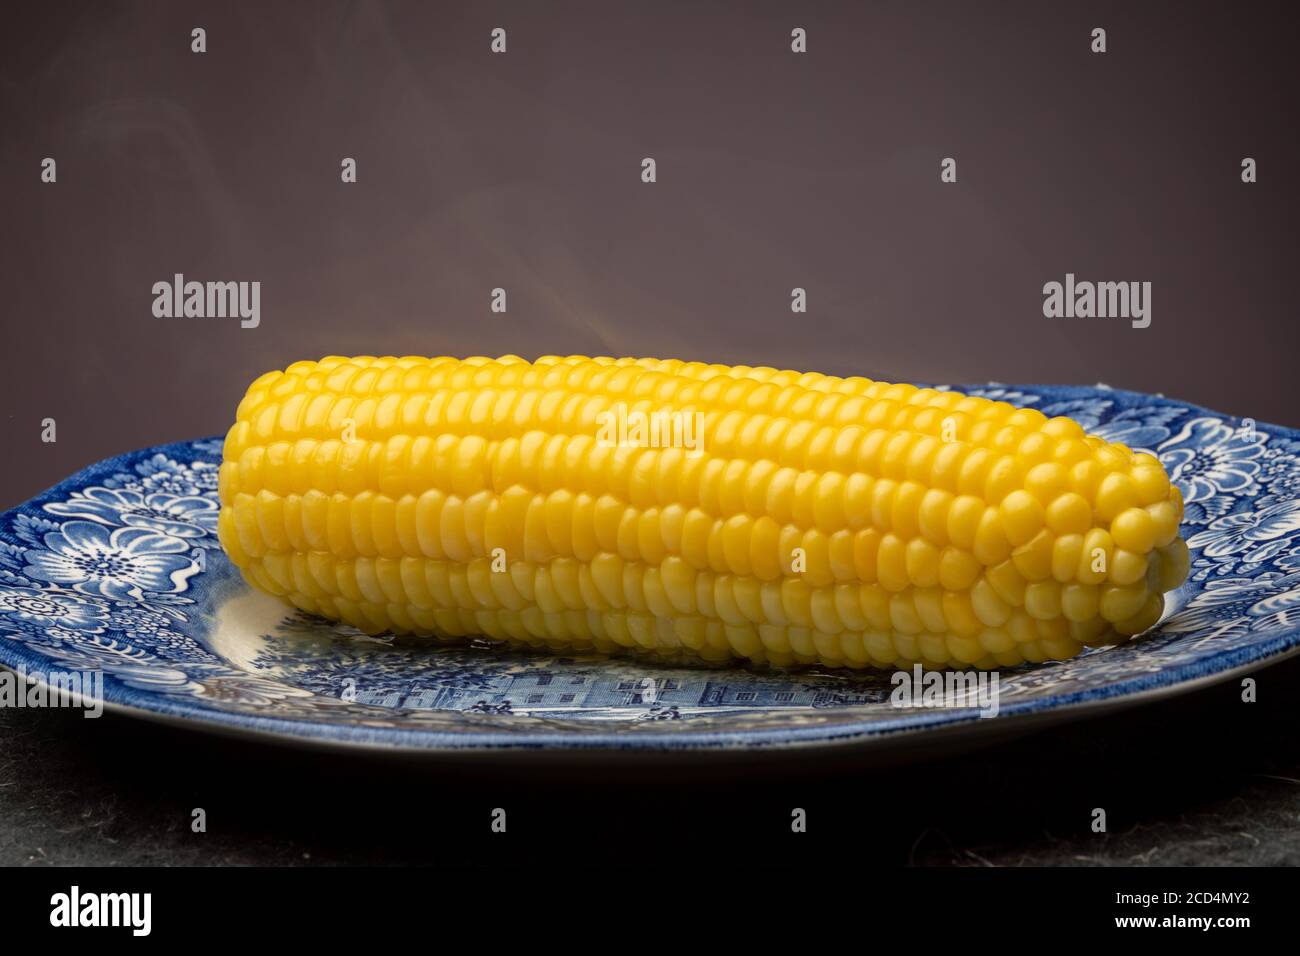 Corn on the cob, steaming after cooking in water, an American summer staple. Stock Photo